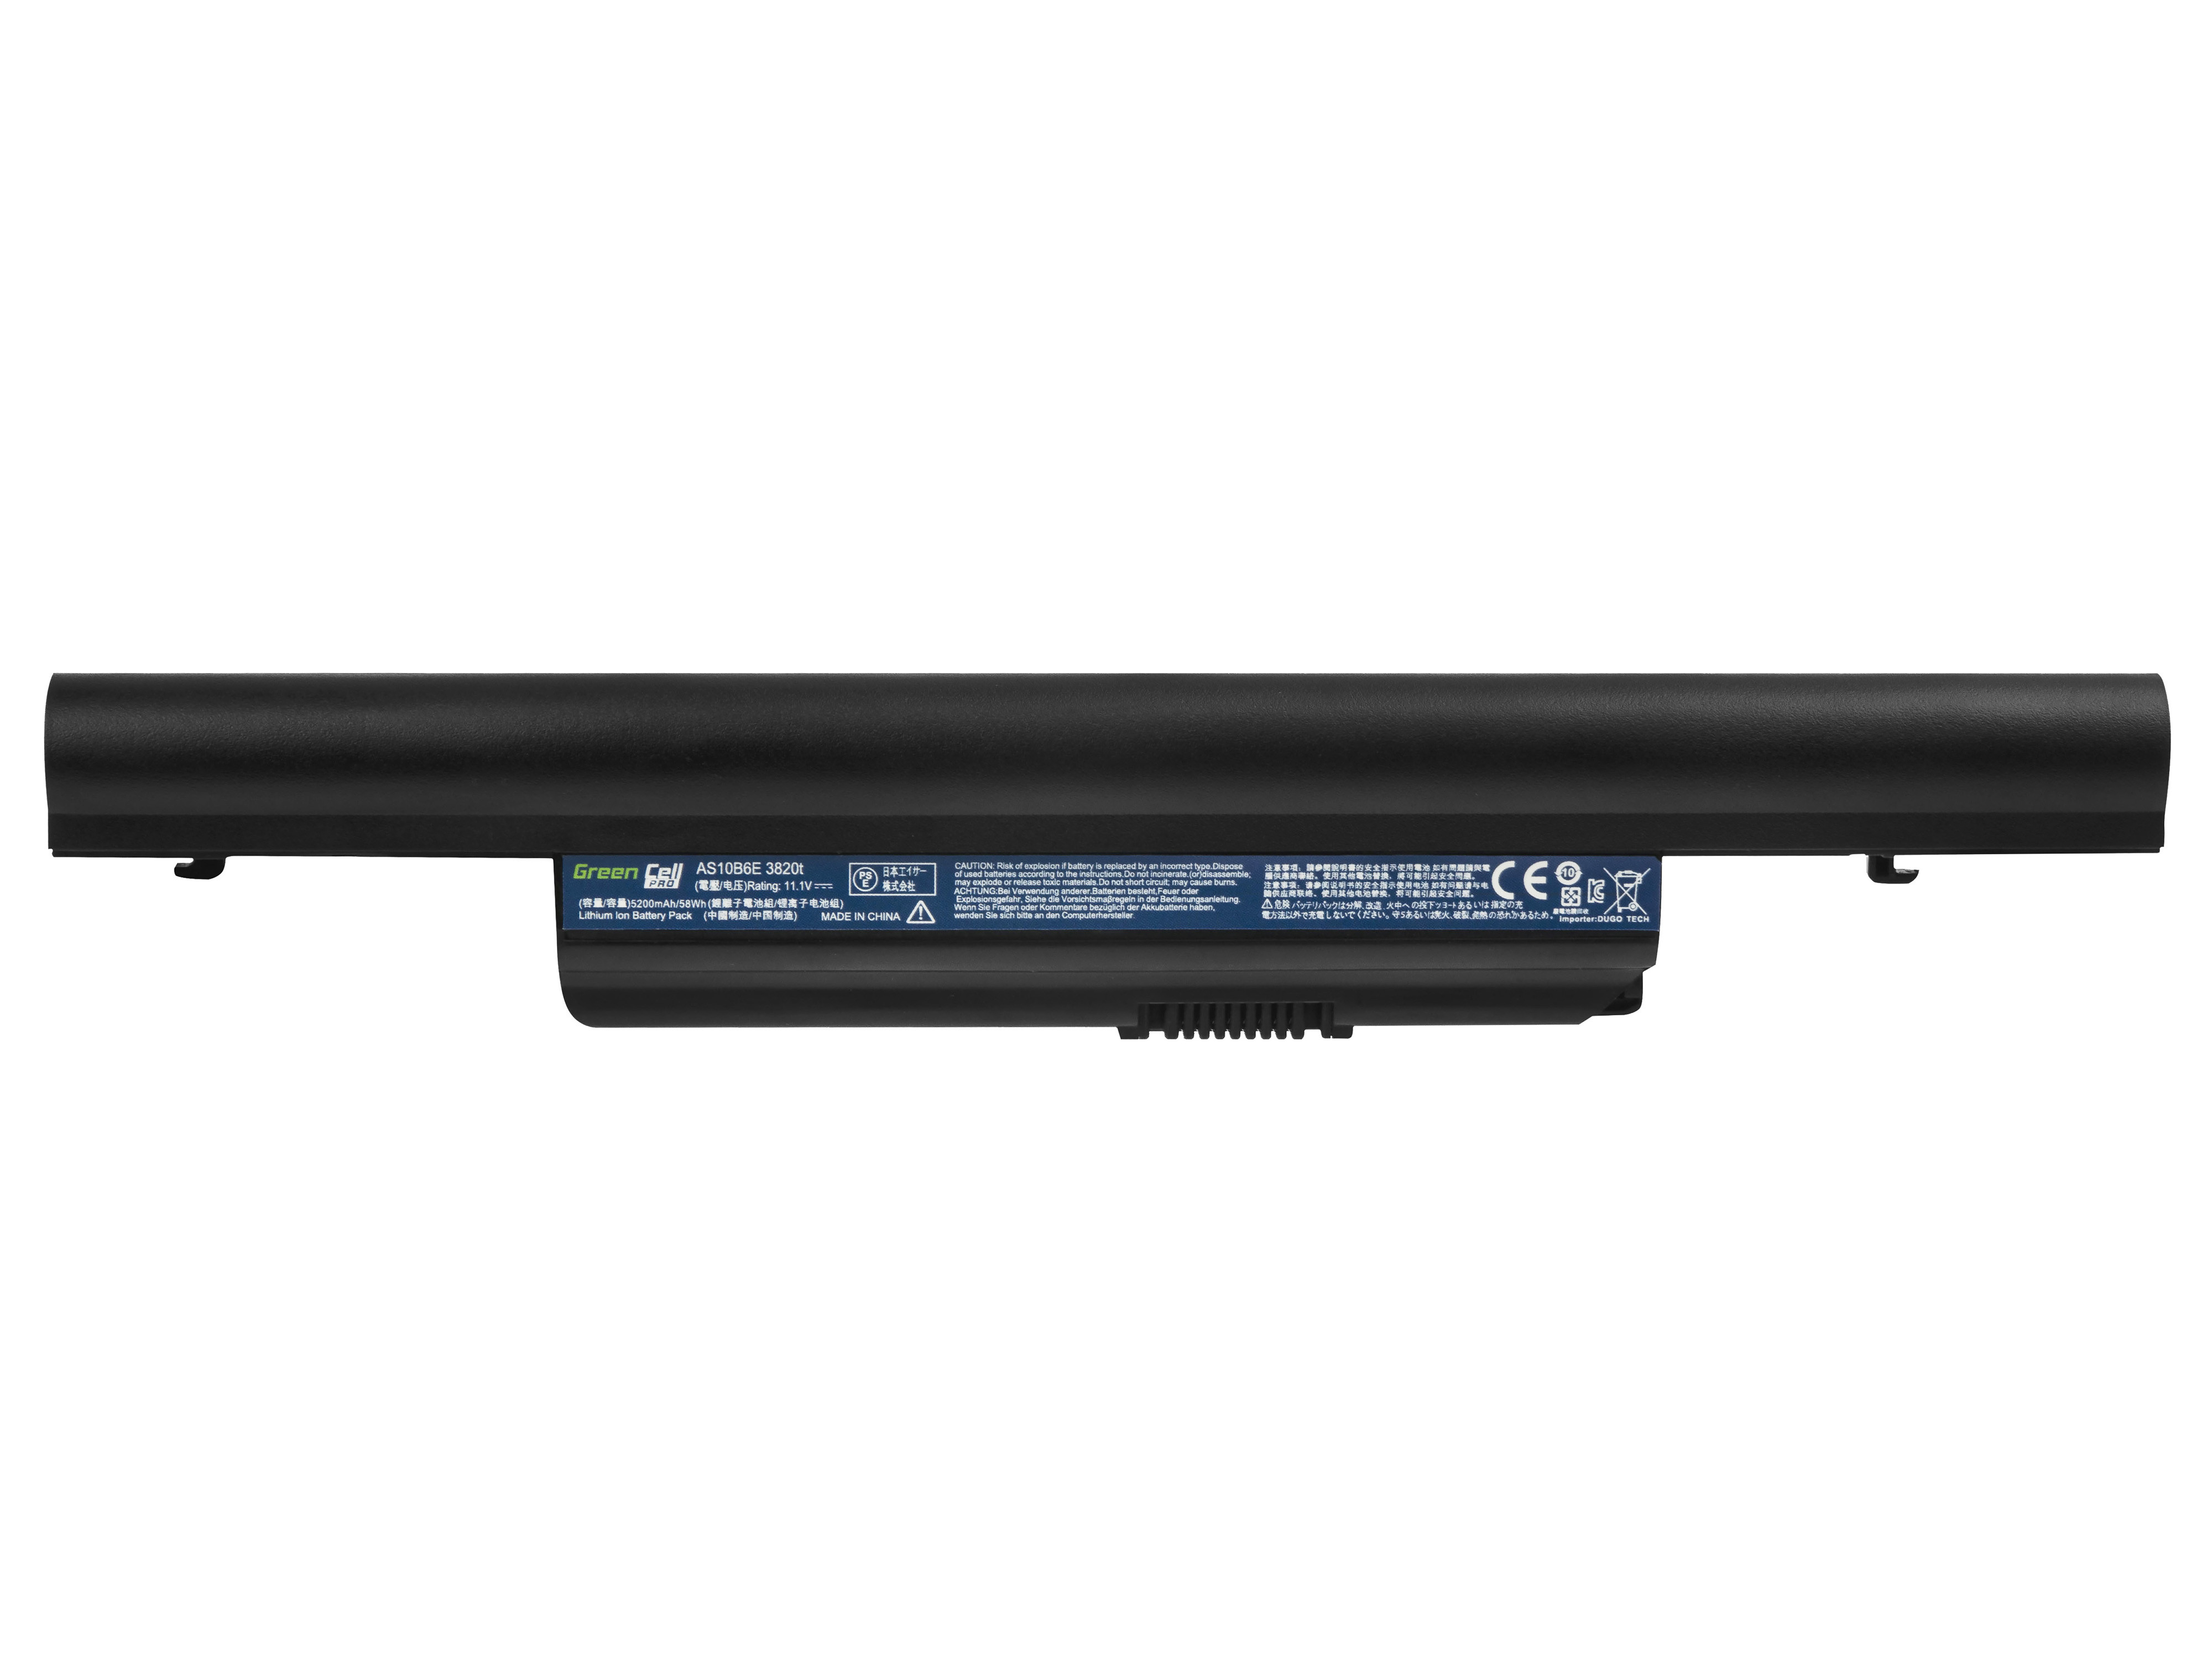 Green Cell AC13PRO Baterie Acer AS10B31 AS10B75 AS10B7E, Acer Aspire 5553 5745 5745G 5820 5820T 5820TG 5820TZG 7739 5200mAh Li-ion